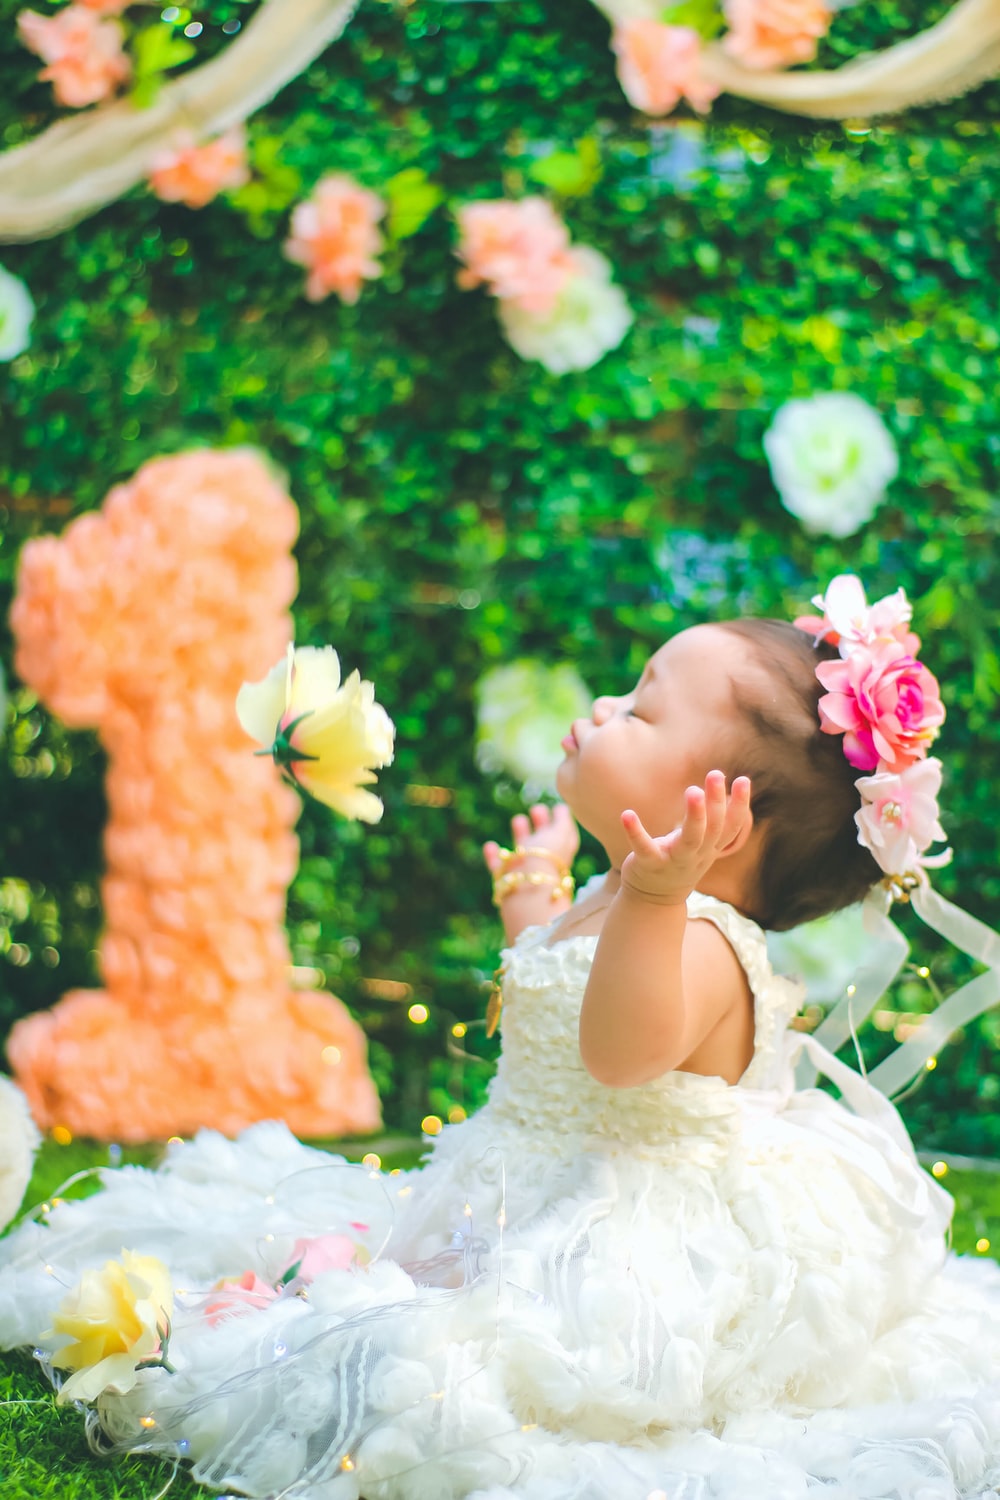 Baby Birthday Picture [HD]. Download Free Image